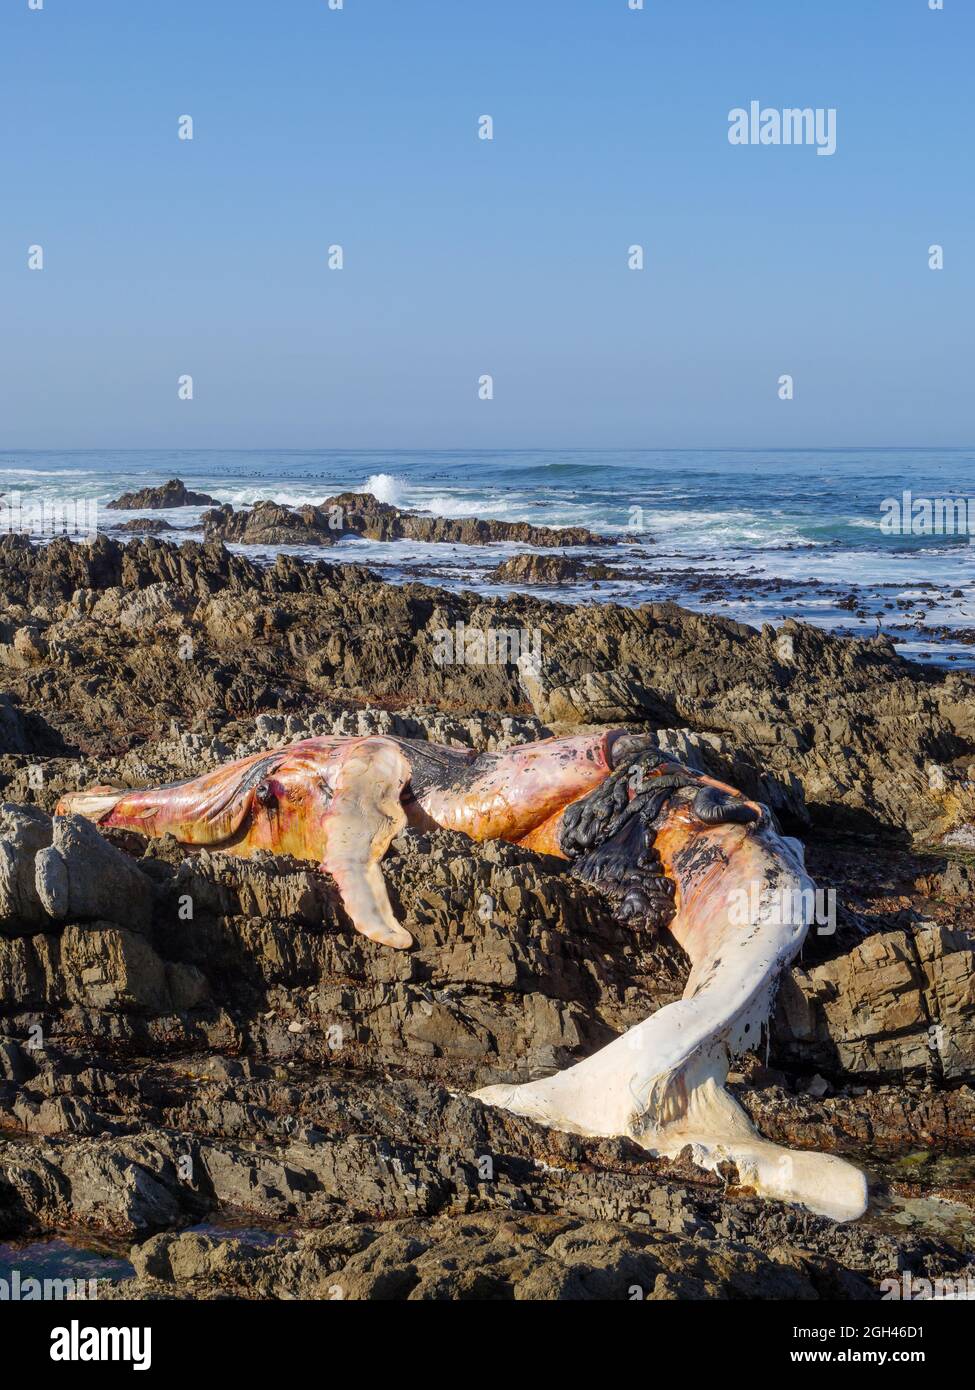 Dead southern right whale (Eubalaena australis) on the rocky shoreline near Hermanus. Whale Coast. Western Cape. South Africa Stock Photo